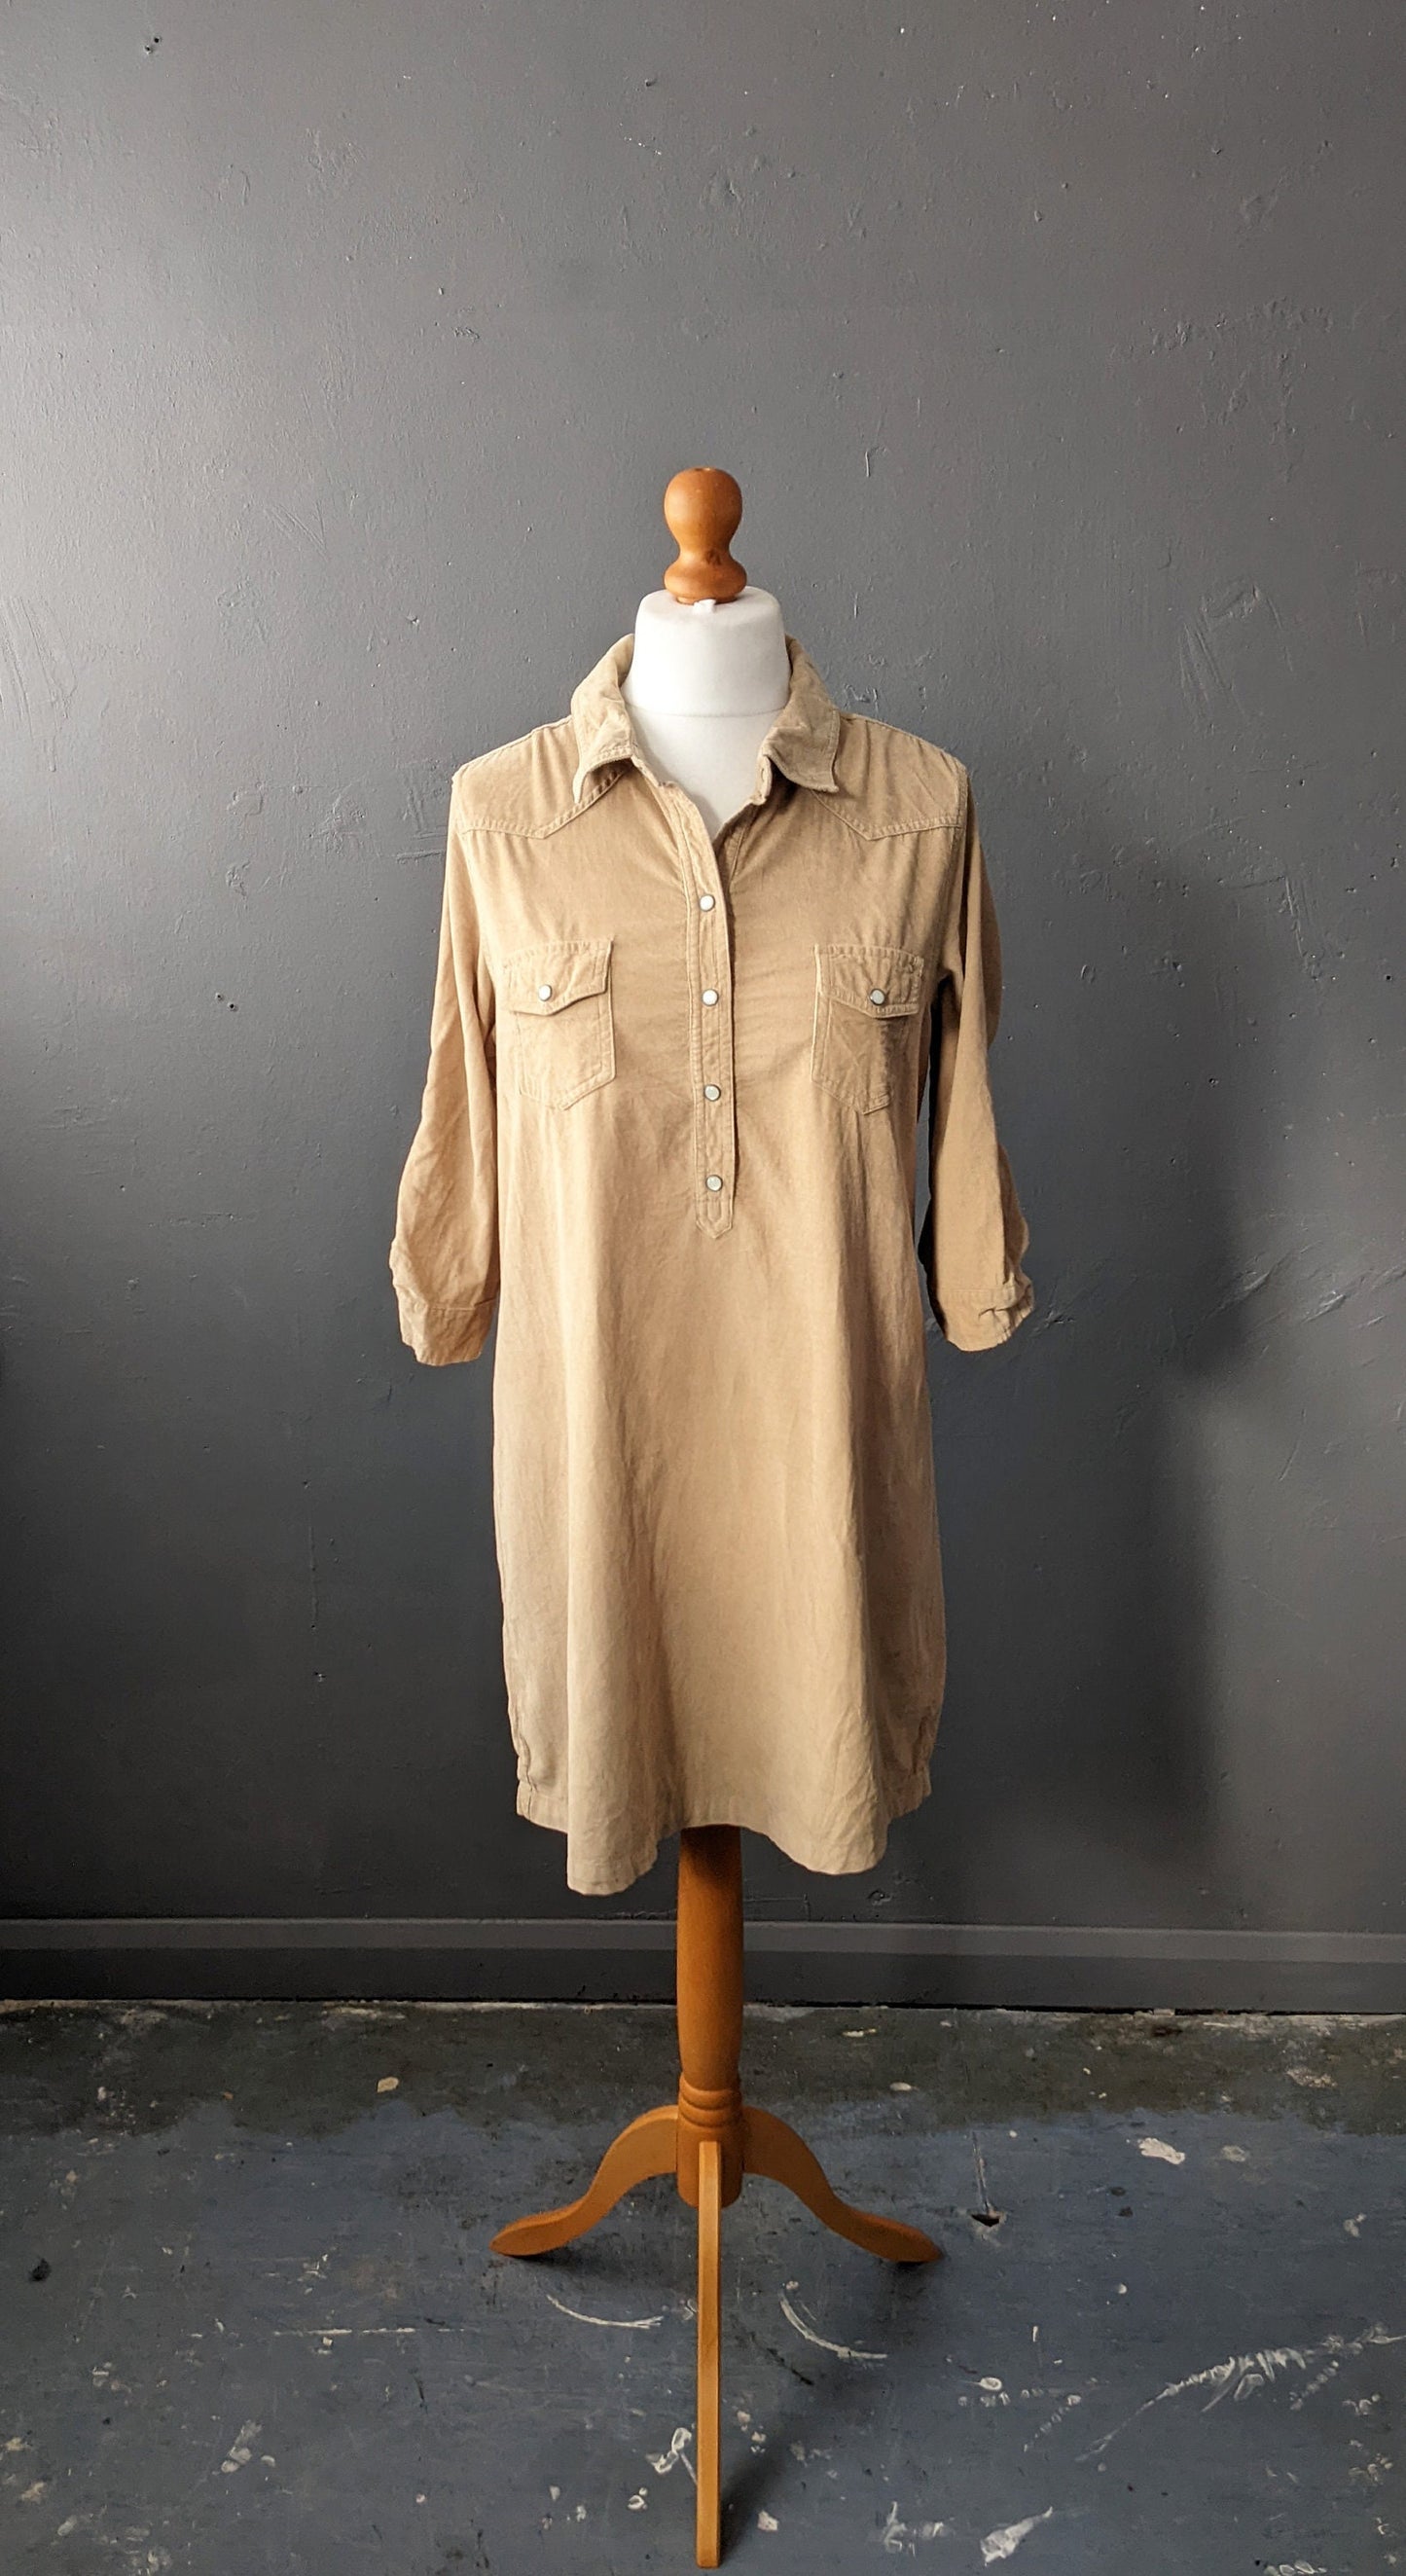 90s Corduroy Shirt Dress by Old Navy, Mid Thigh Length Minidress, Size Large